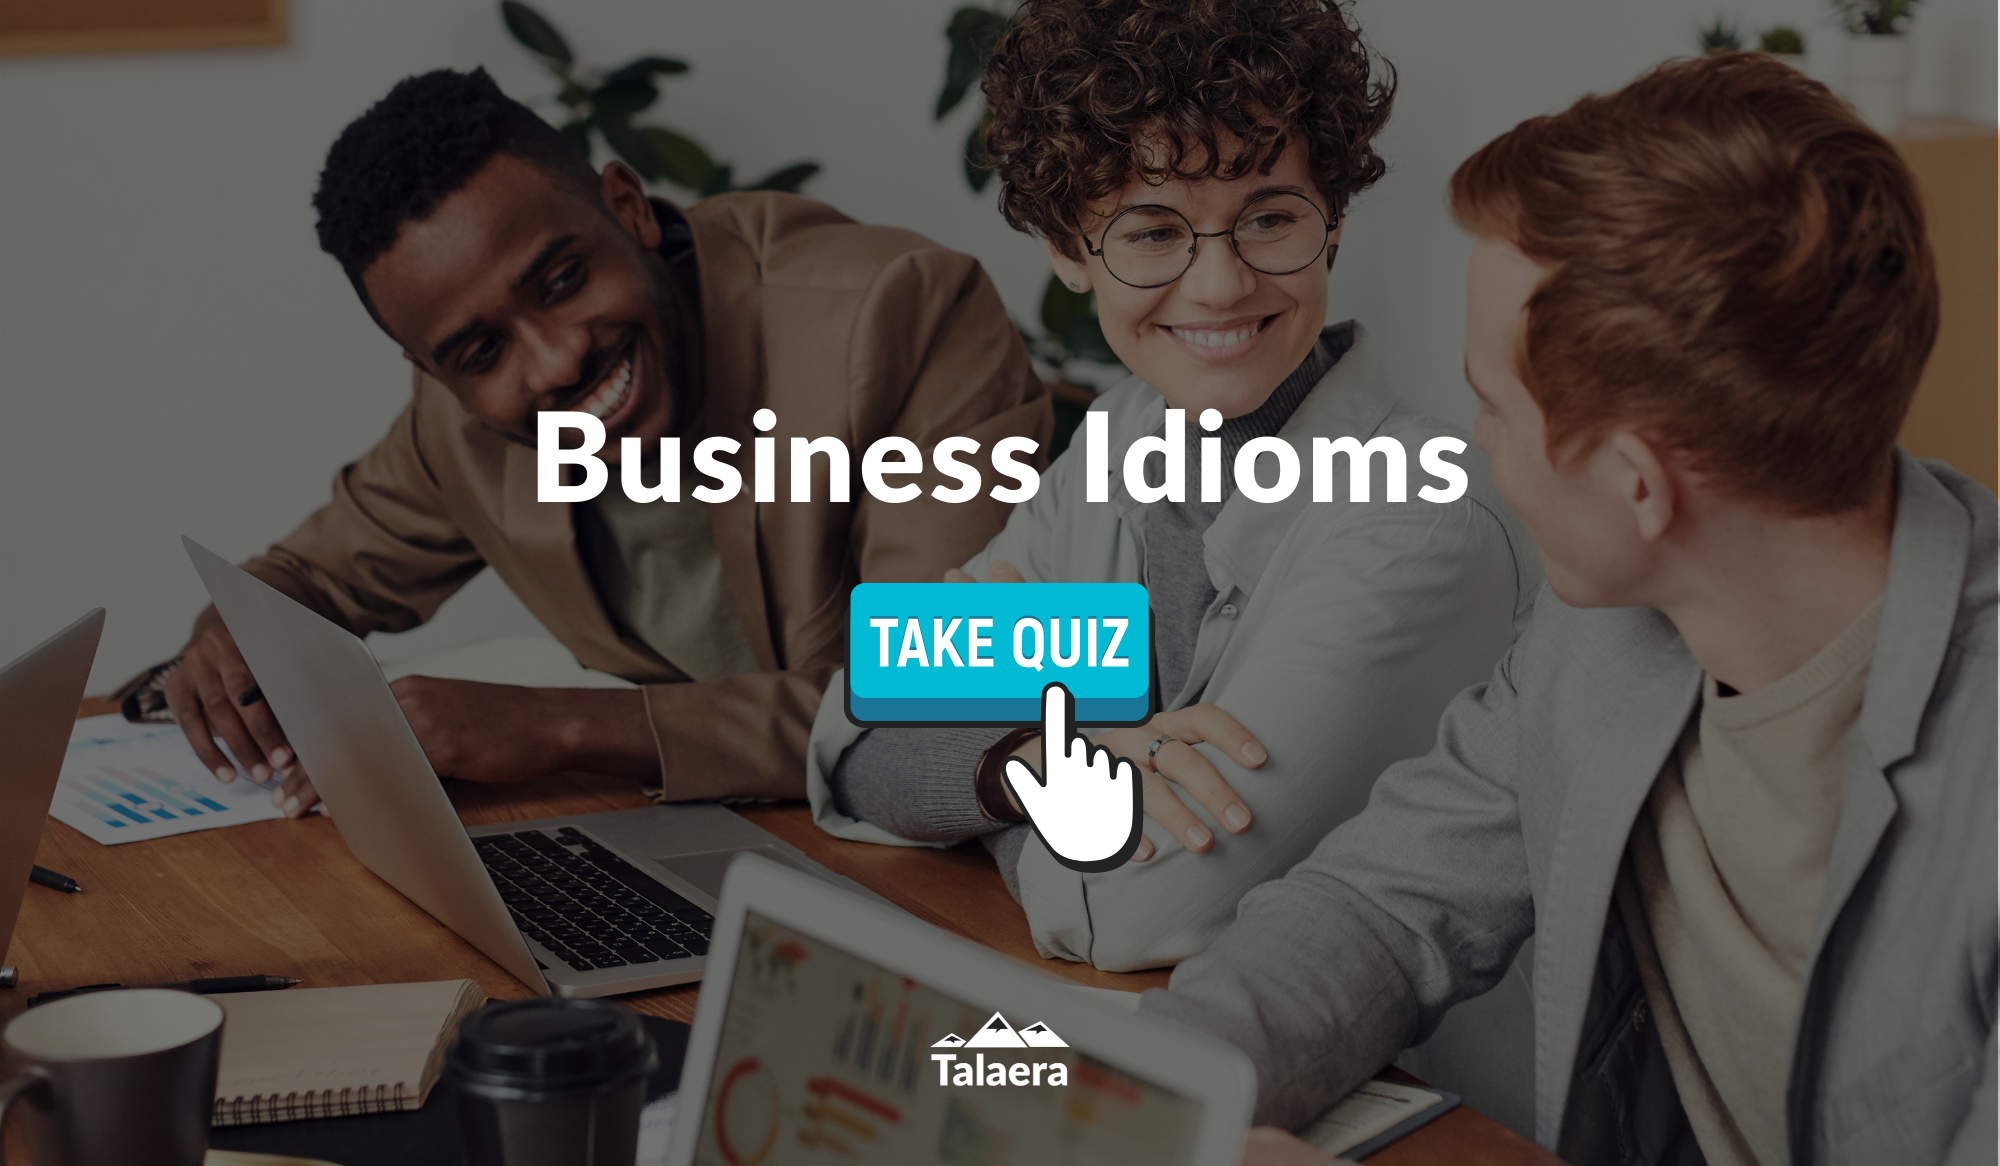 How Many Business Idioms Do You Know? Take The Test